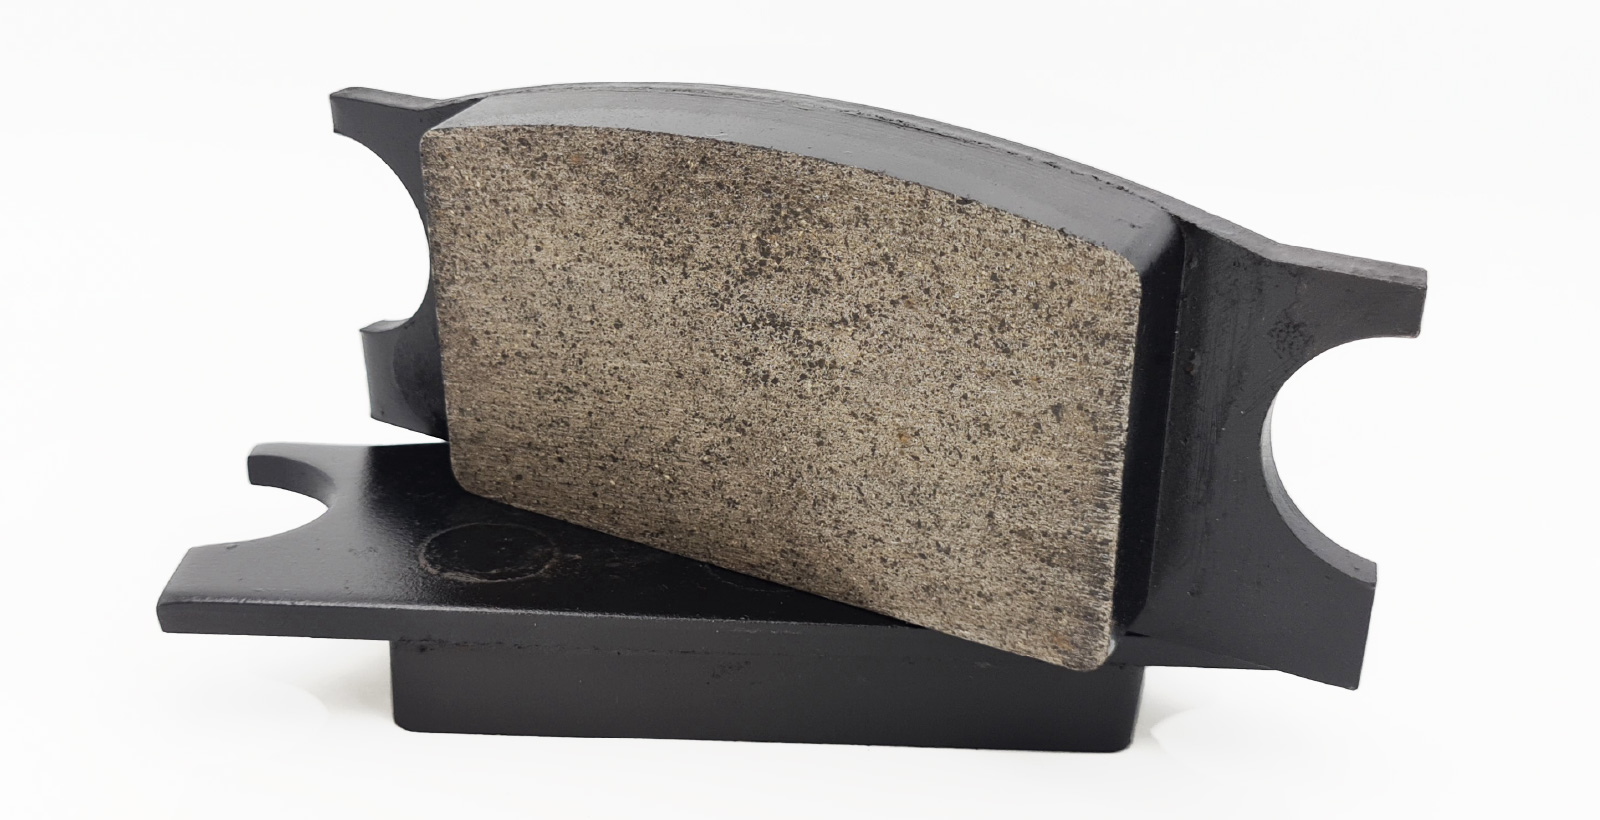 Off Highway Brake Pads for Forestry and Timber Industry